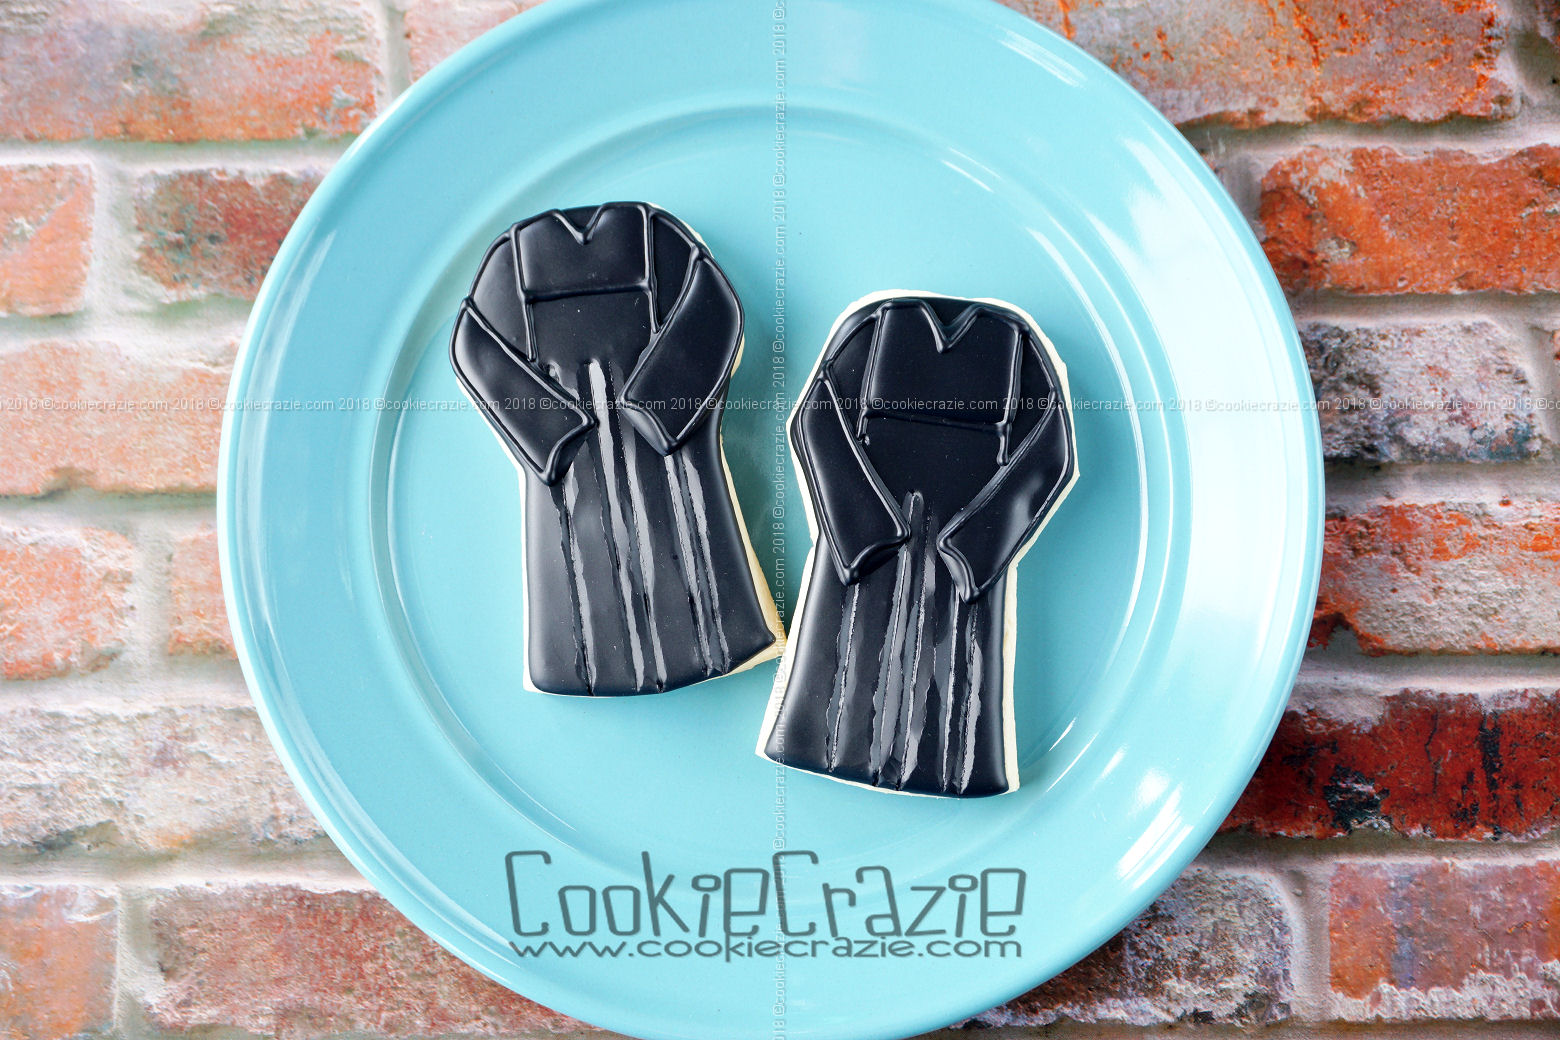  Graduation Gown Decorated Sugar Cookie YouTube video  HERE  